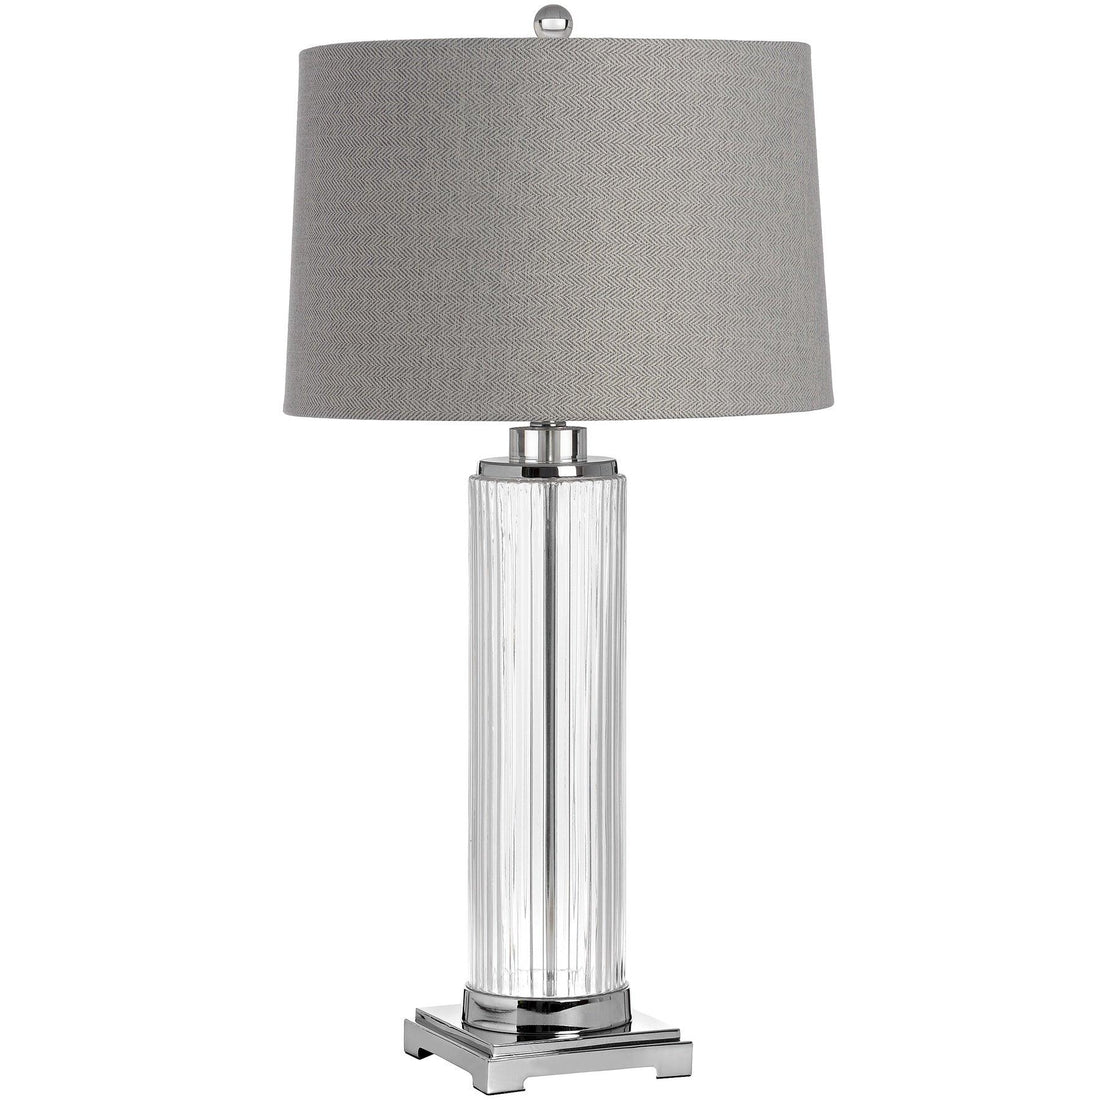 Roma Glass Table Lamp - £219.95 - Lighting > Table Lamps > Hottest Deals 